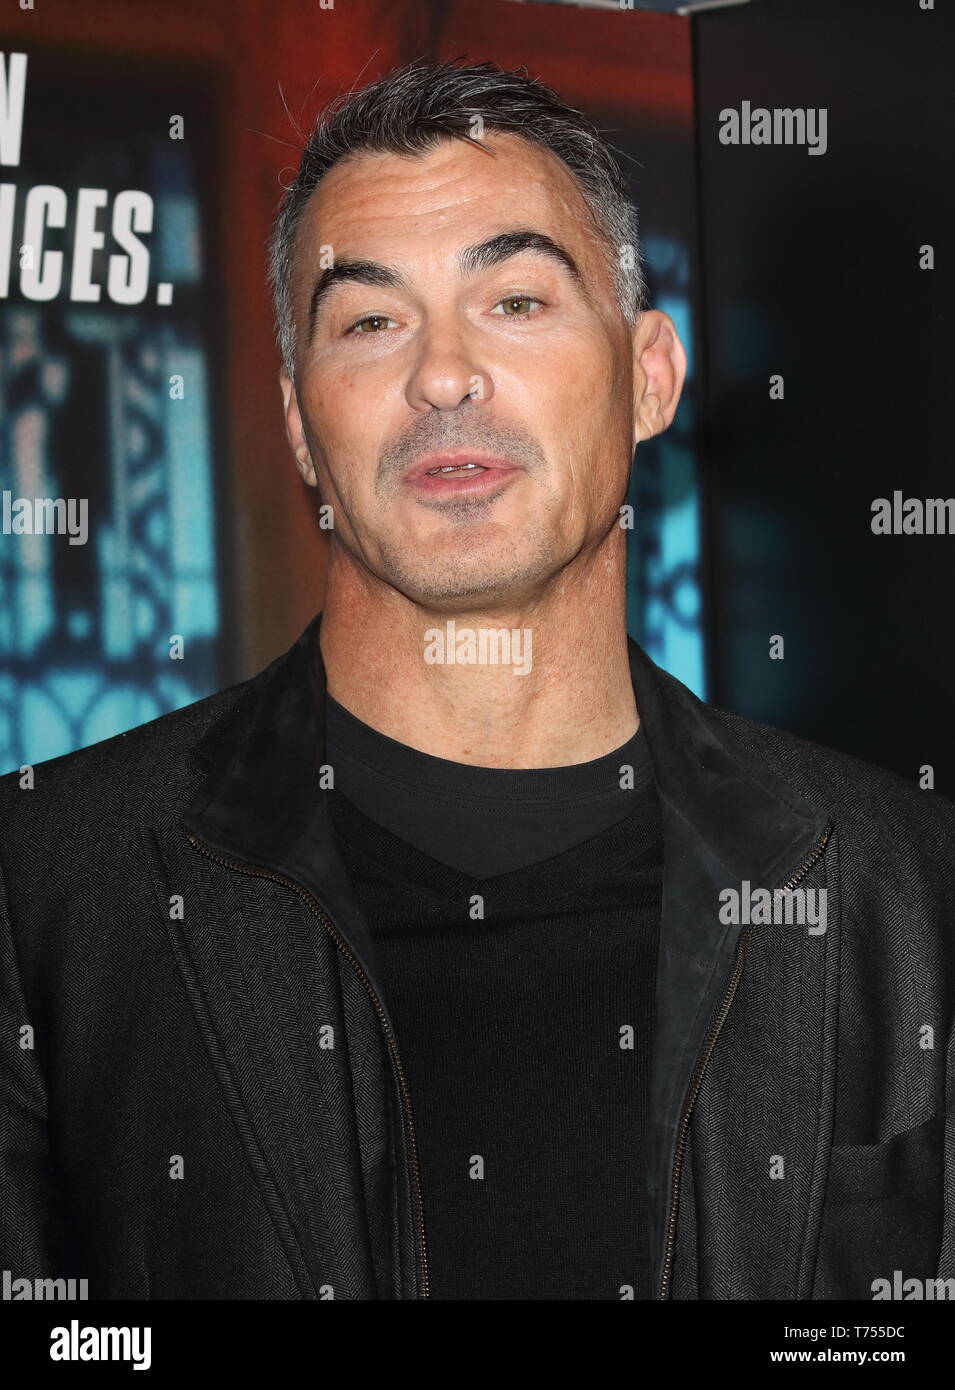 Chad Stahelski seen attending the John Wick: Chapter 3 Parabellum, a special film screening at The Ham Yard Hotel, Denman Street. Stock Photo